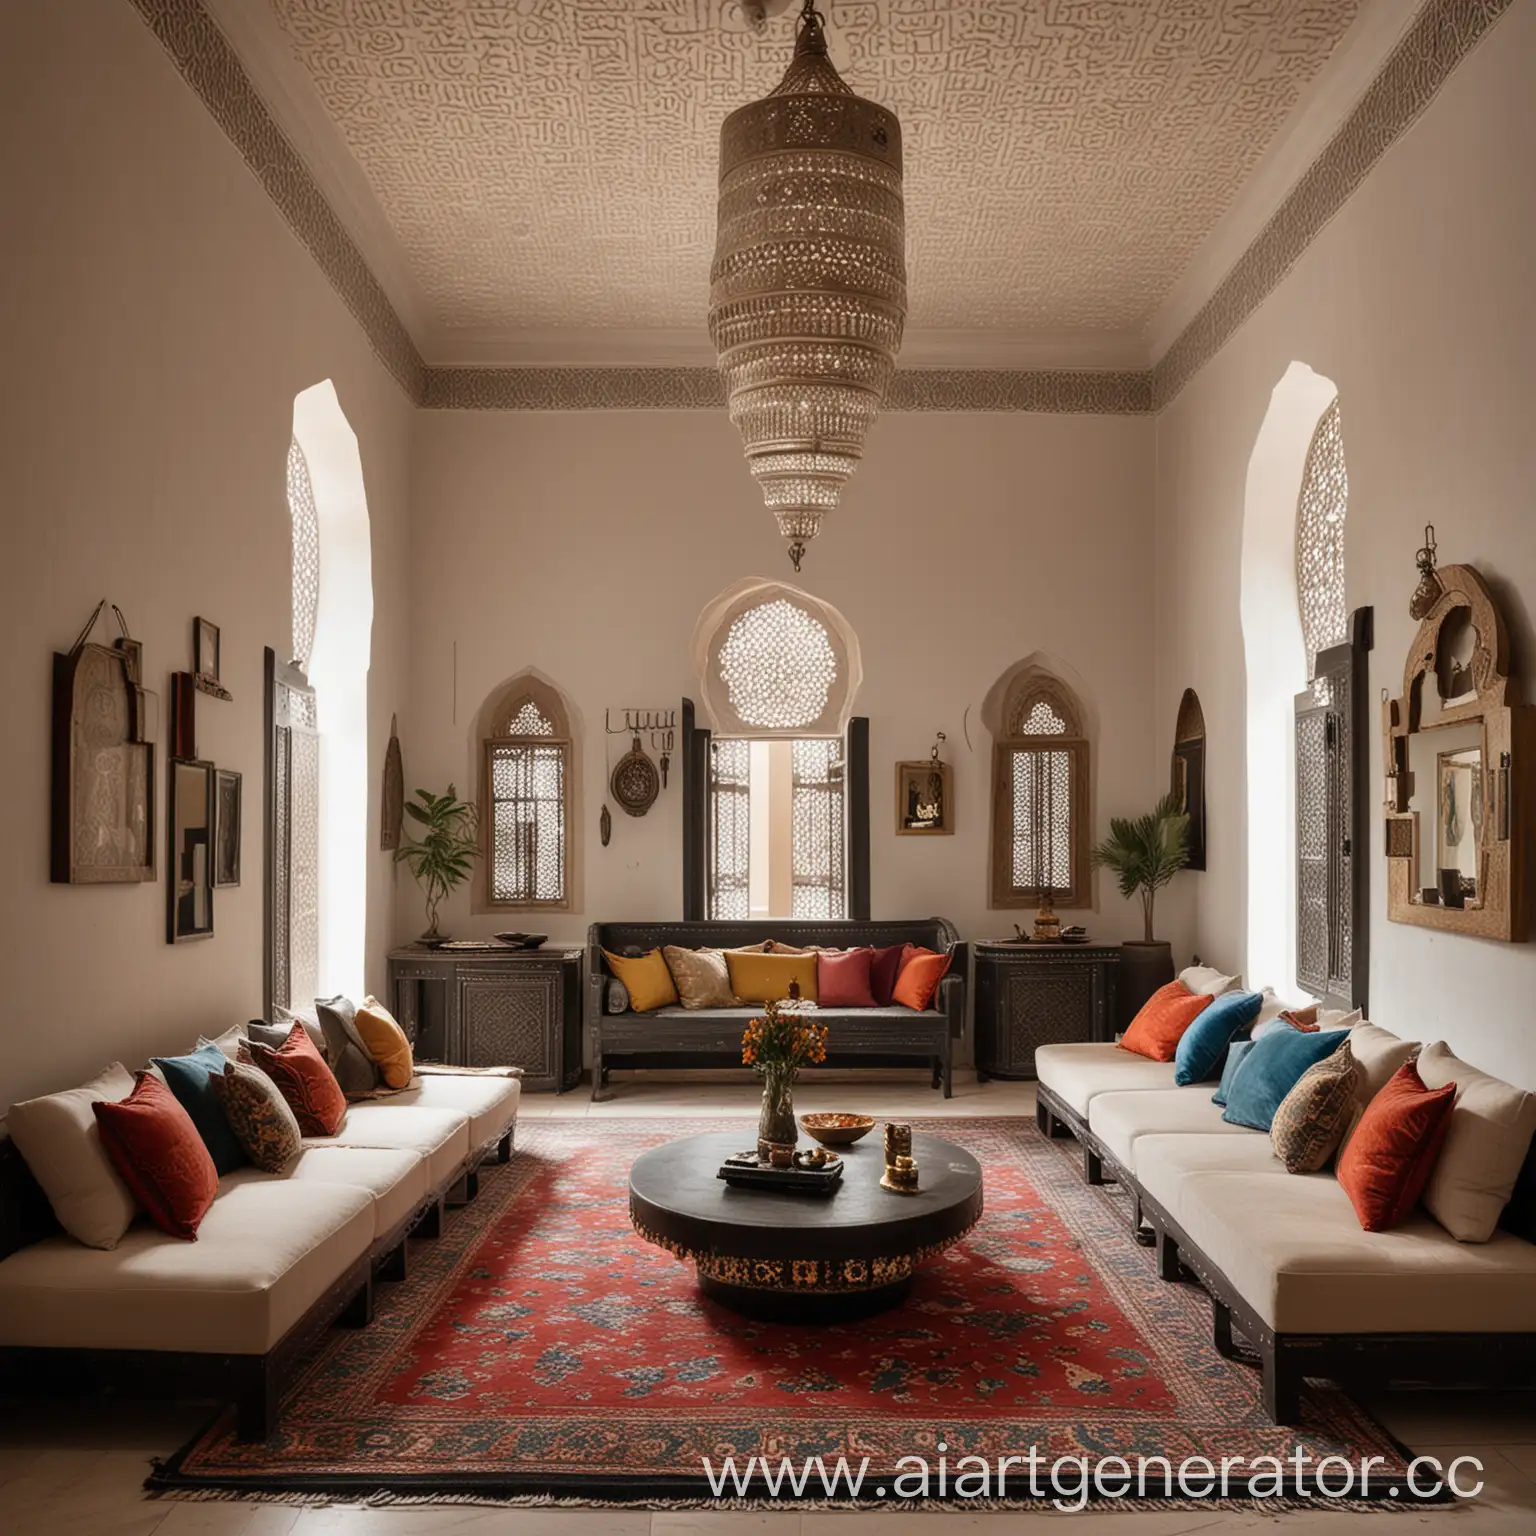 Contemporary-Moroccan-Salon-Interior-Design-with-Elegant-Furnishings-and-Traditional-Accents